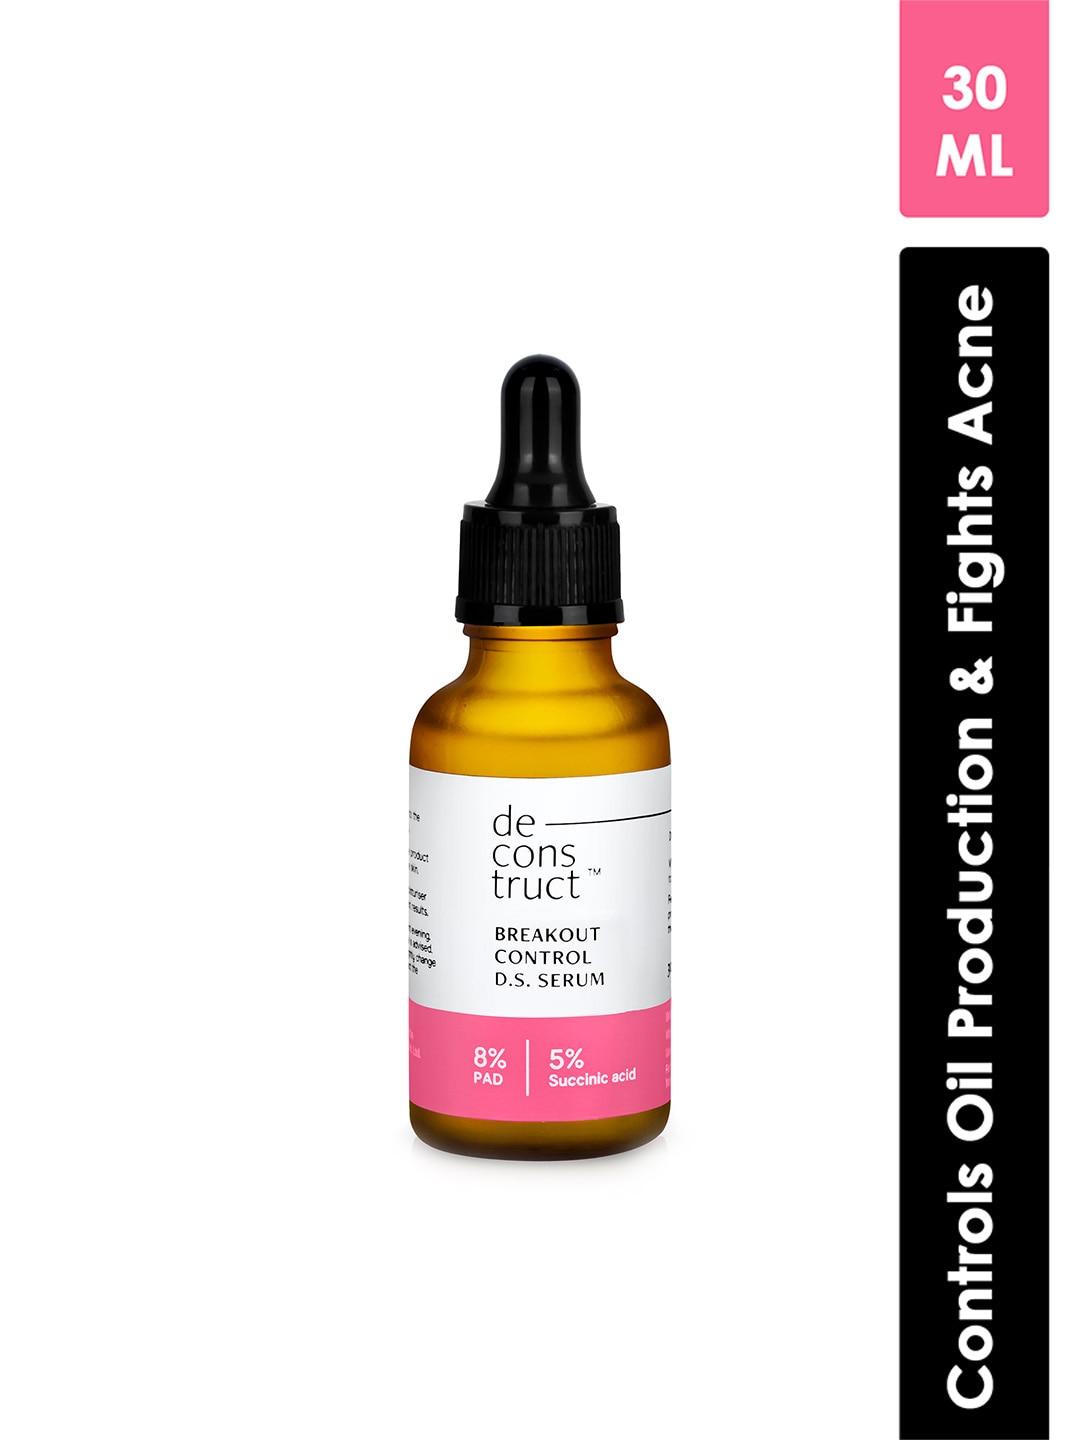 deconstruct Breakout Control D.S. Serum with 8% PAD & 5% Succinic Acid 30 ml